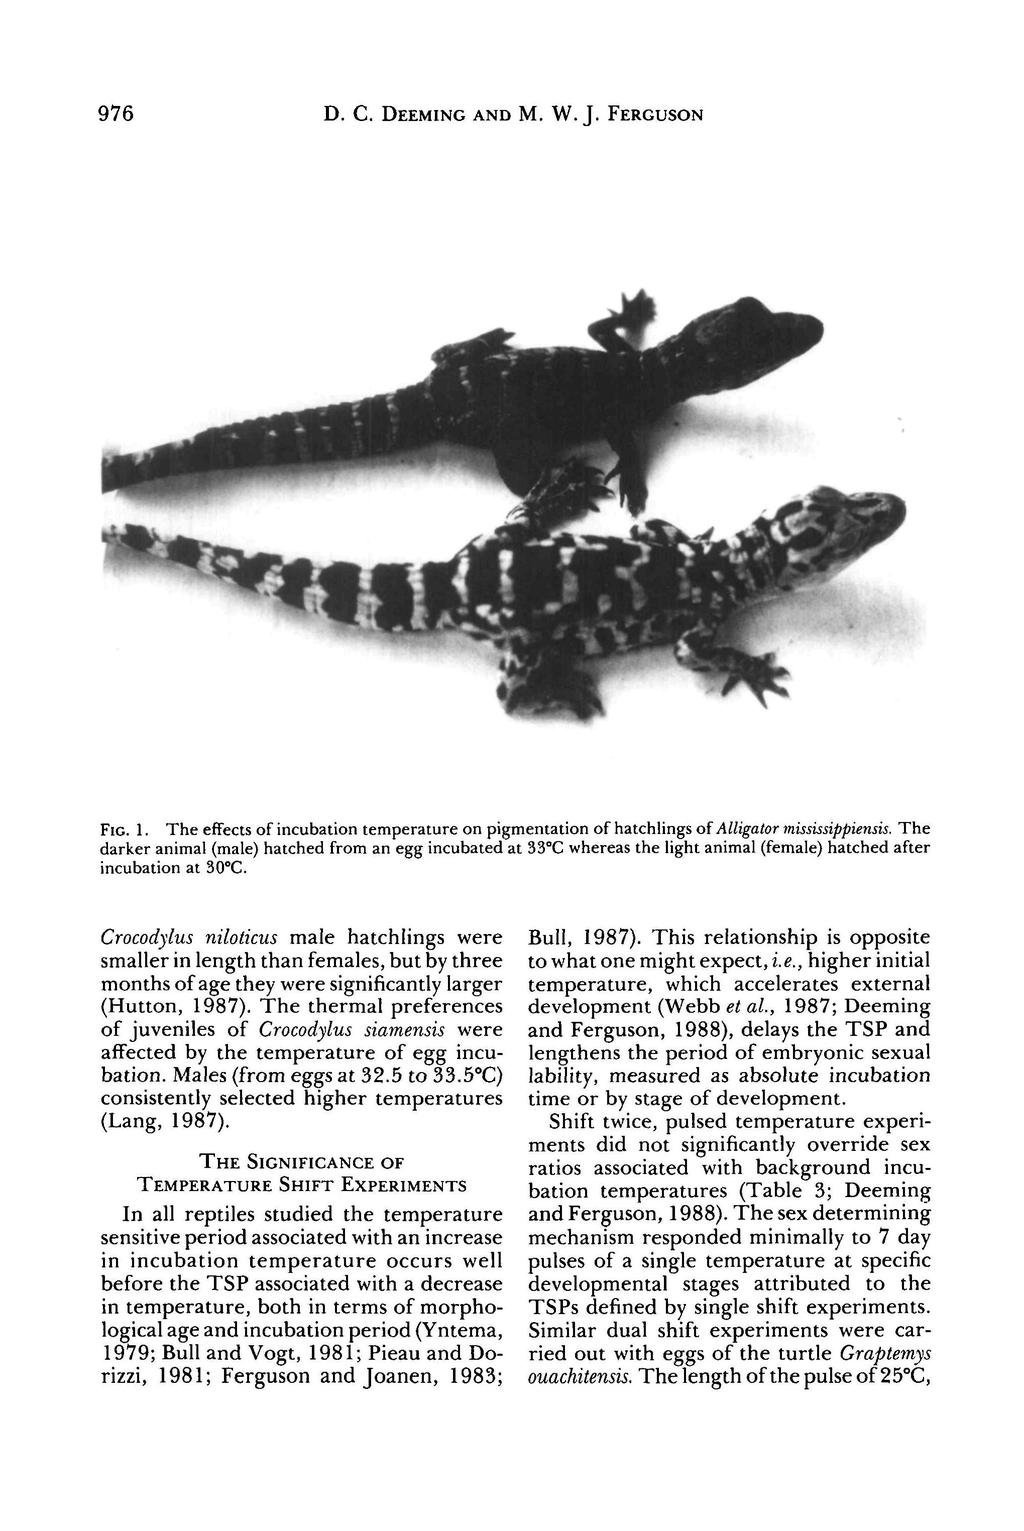 976 D. C. DEEMING AND M. W. J. FERGUSON FIG. 1. The effects of incubation temperature on pigmentation of hatchlings of Alligator mississippiensis.